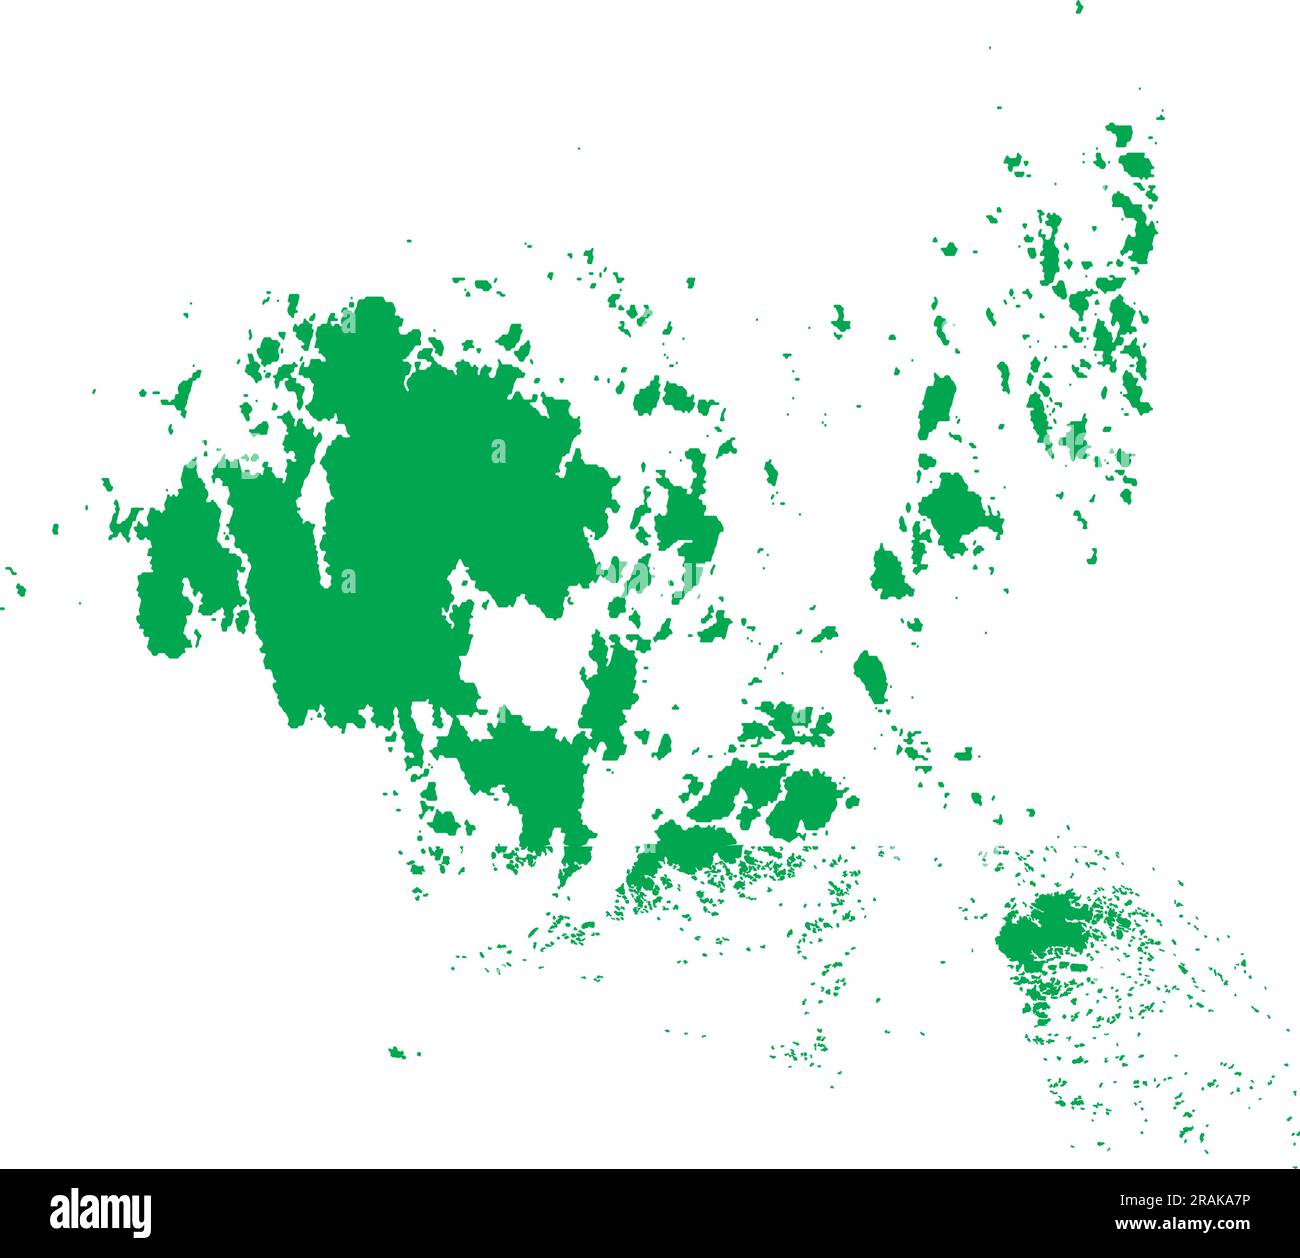 GREEN CMYK color map of ALAND ISLANDS, FINLAND Stock Vector